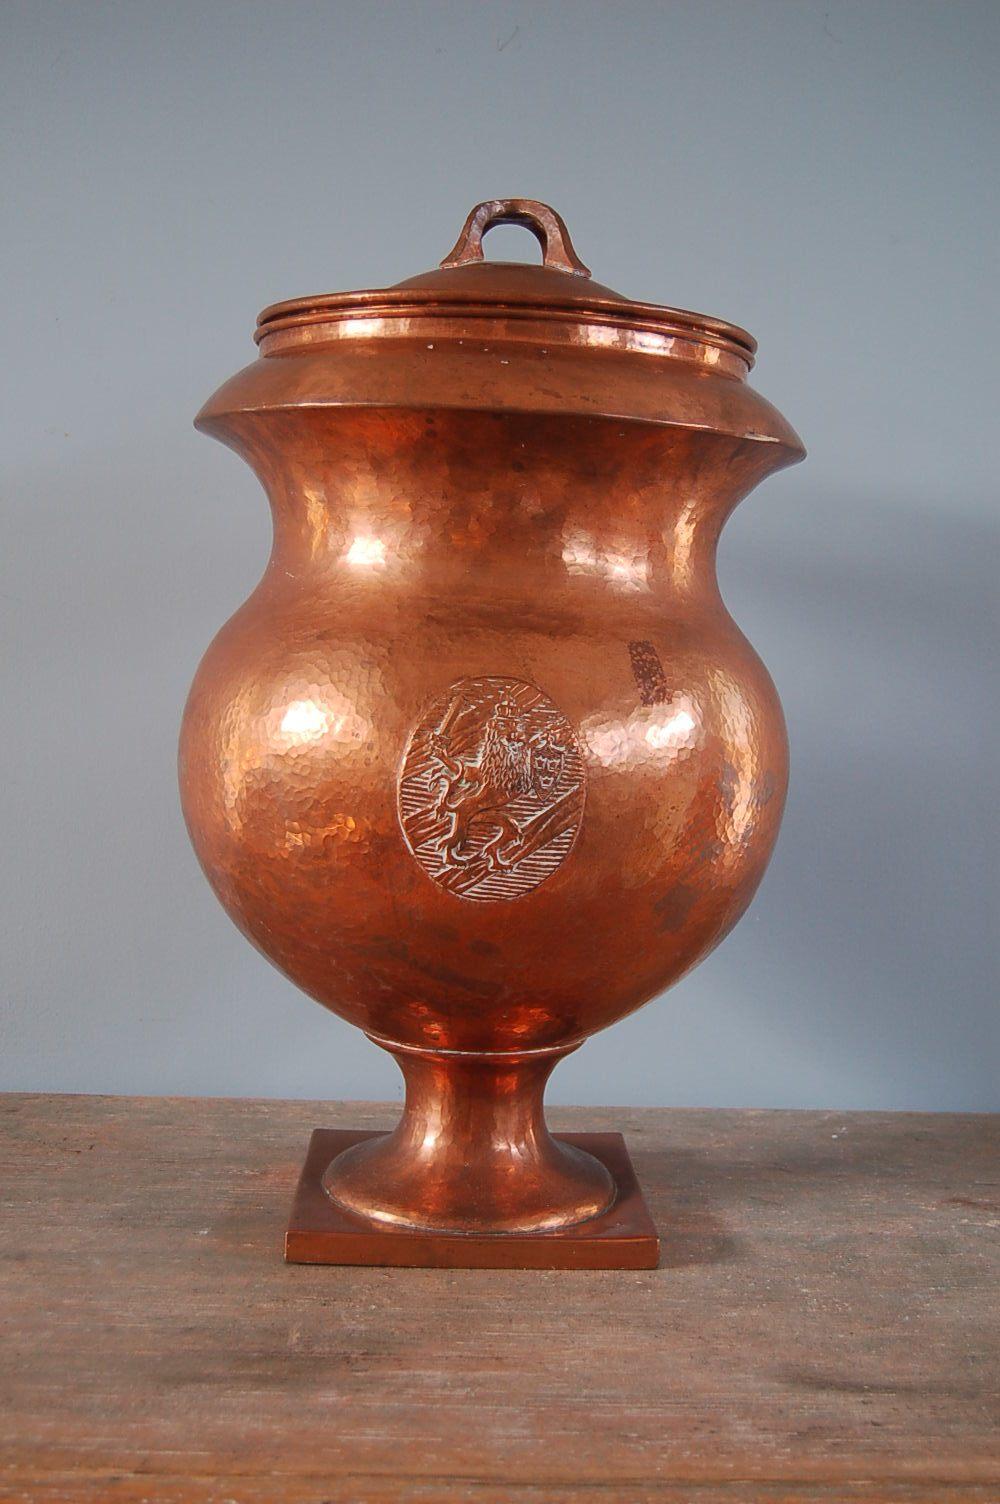 Exceptional, large Swedish hammered copper covered urn with lion / coat of arms with tre kronor (3 crowns) the Swedish national emblem, origin: Sweden, circa 1820.